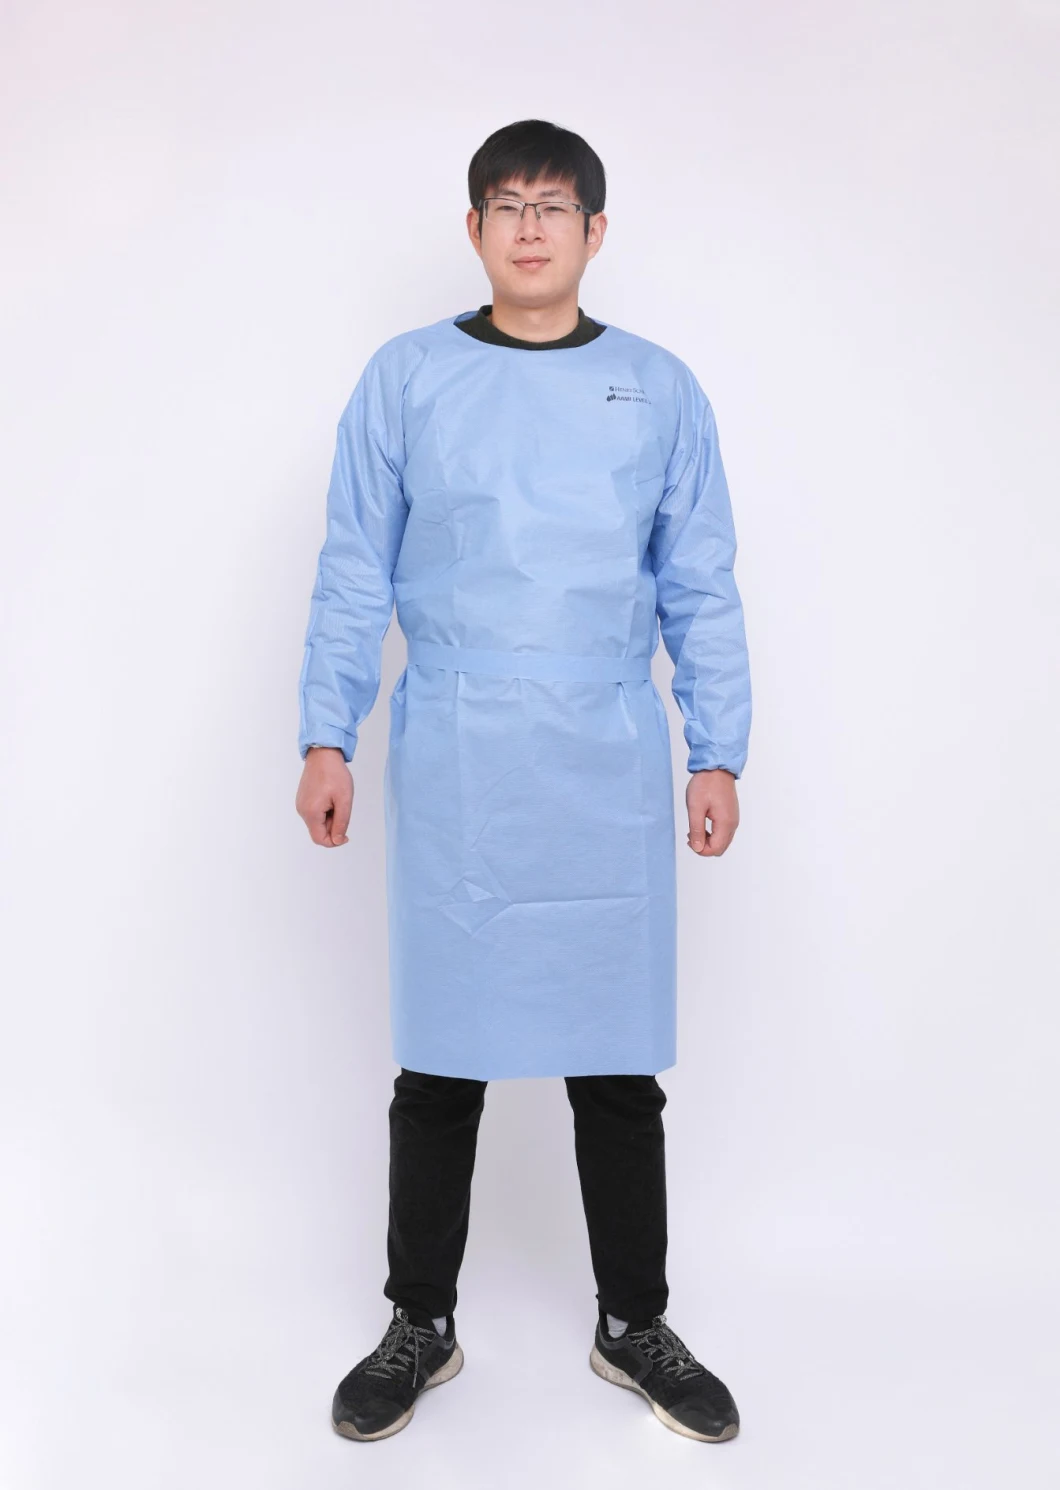 Customize Disposable White Clothing Wear Suit Safety Working Clothes Construction Worker Garment Protective Overall SMS